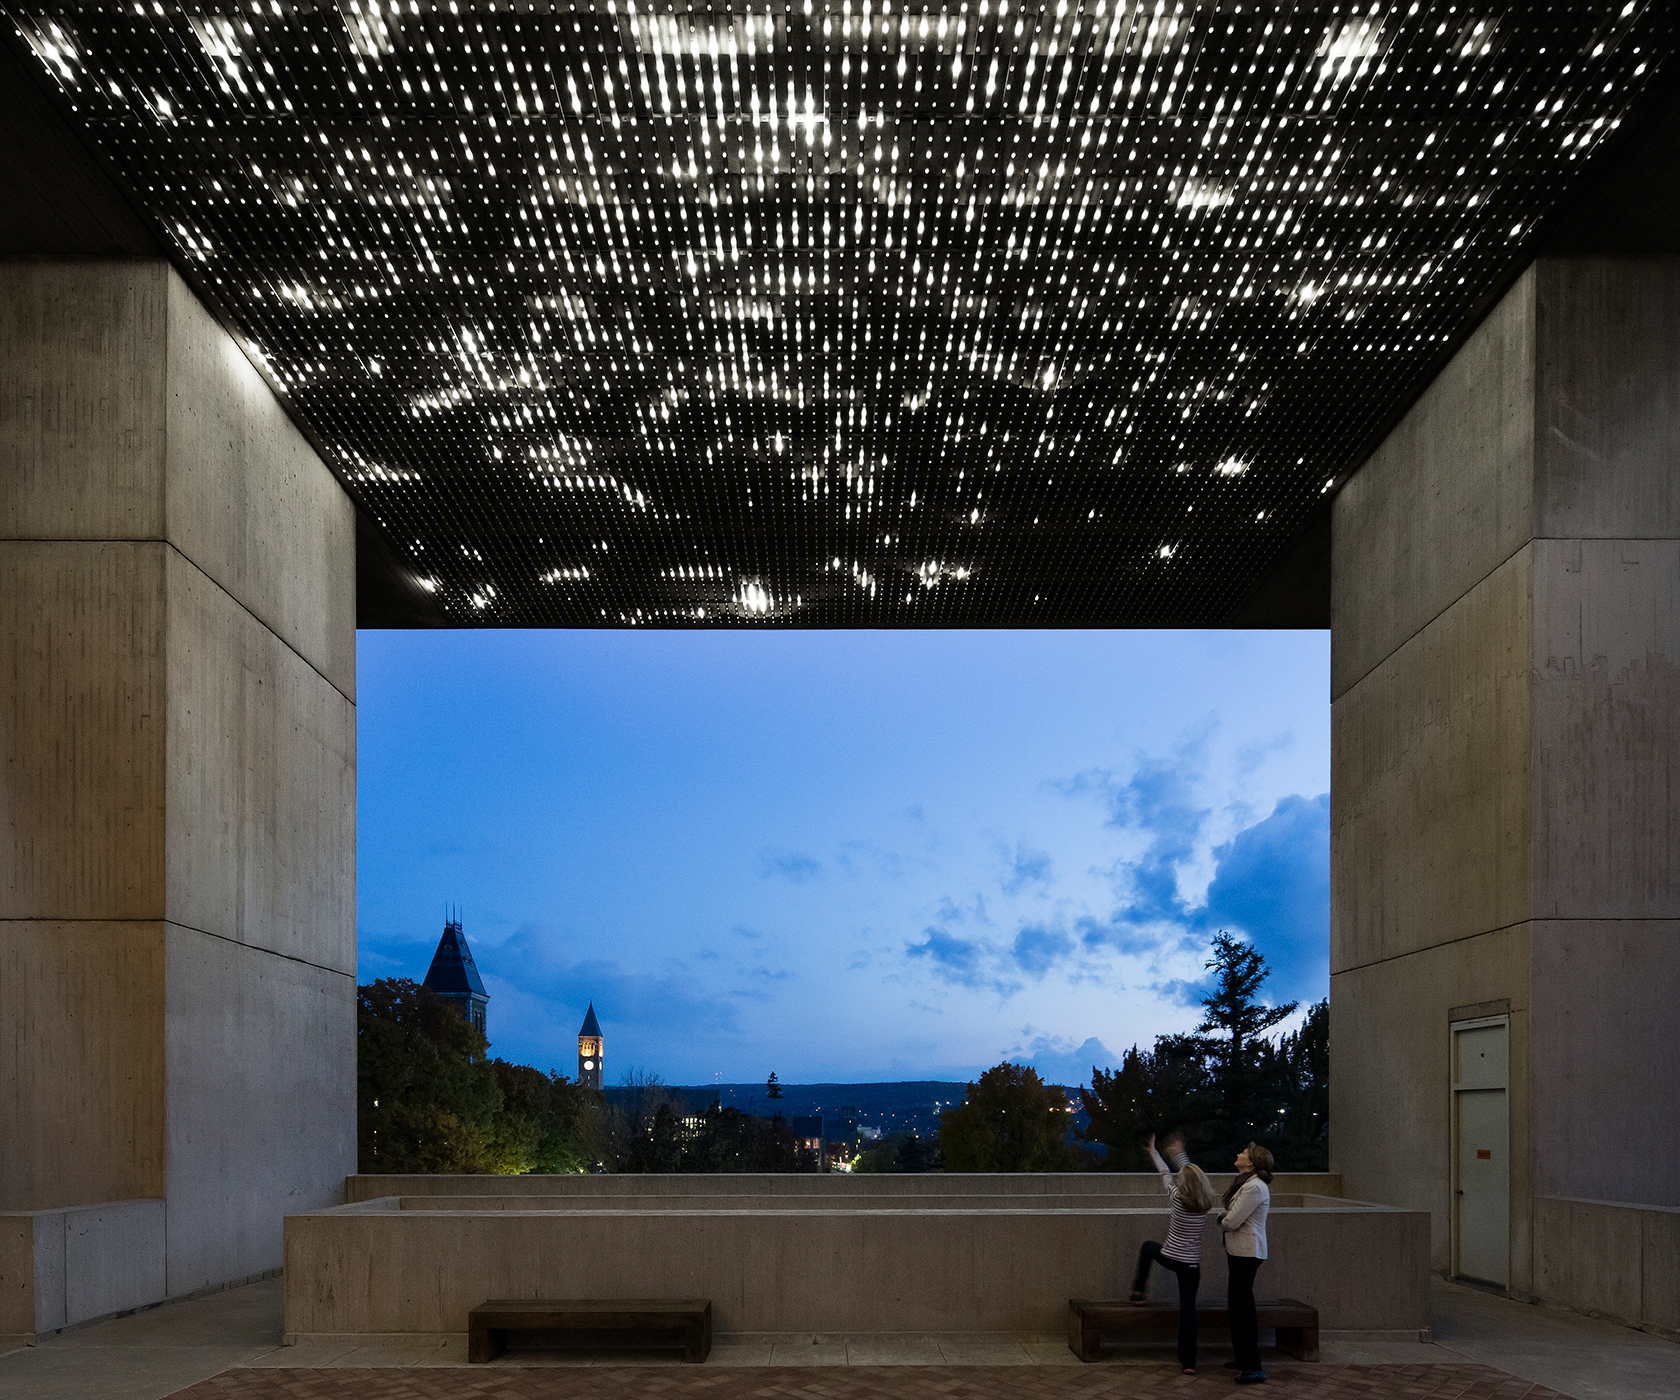 The ceiling of an outdoor courtyard is covered with thousands of white lights while figures below point up at twilight